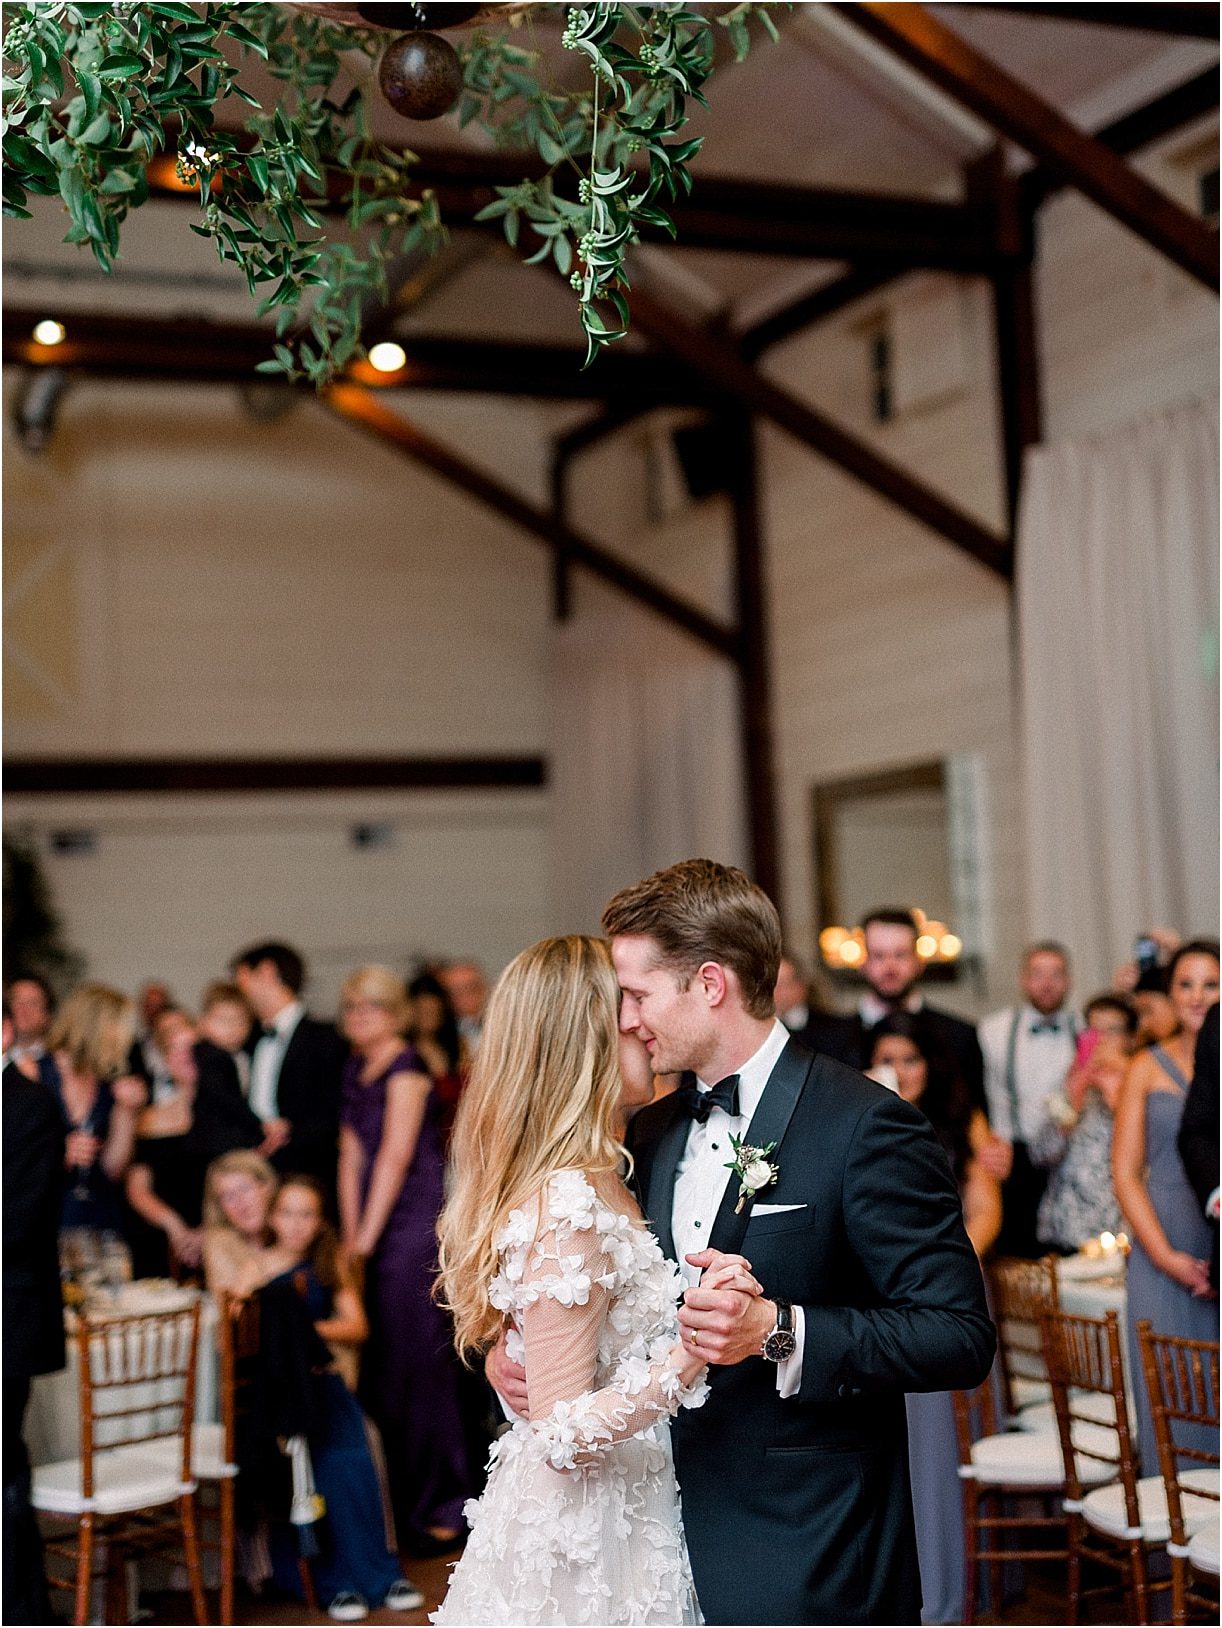 Gorgeous Pippin Hill Wedding in Charlottesville Virginia Mountains | Hill City Bride Virginia Weddings Blog First Dance